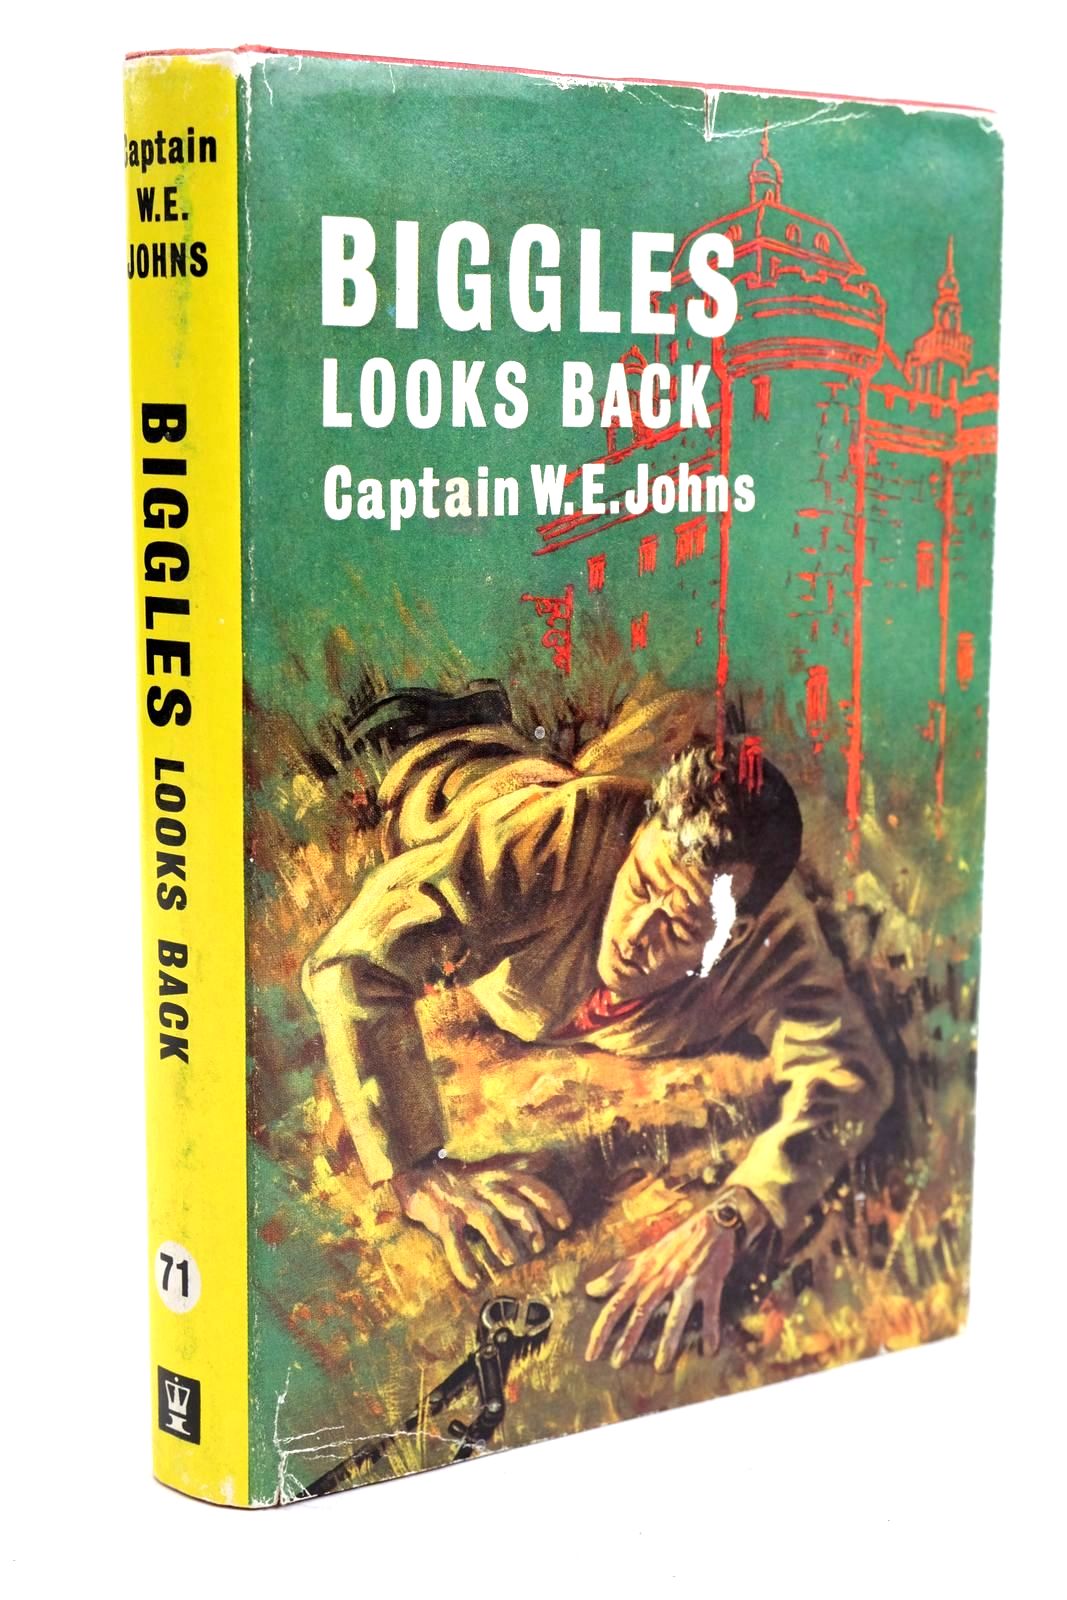 Photo of BIGGLES LOOKS BACK written by Johns, W.E. illustrated by Stead,  published by Hodder & Stoughton (STOCK CODE: 1320553)  for sale by Stella & Rose's Books